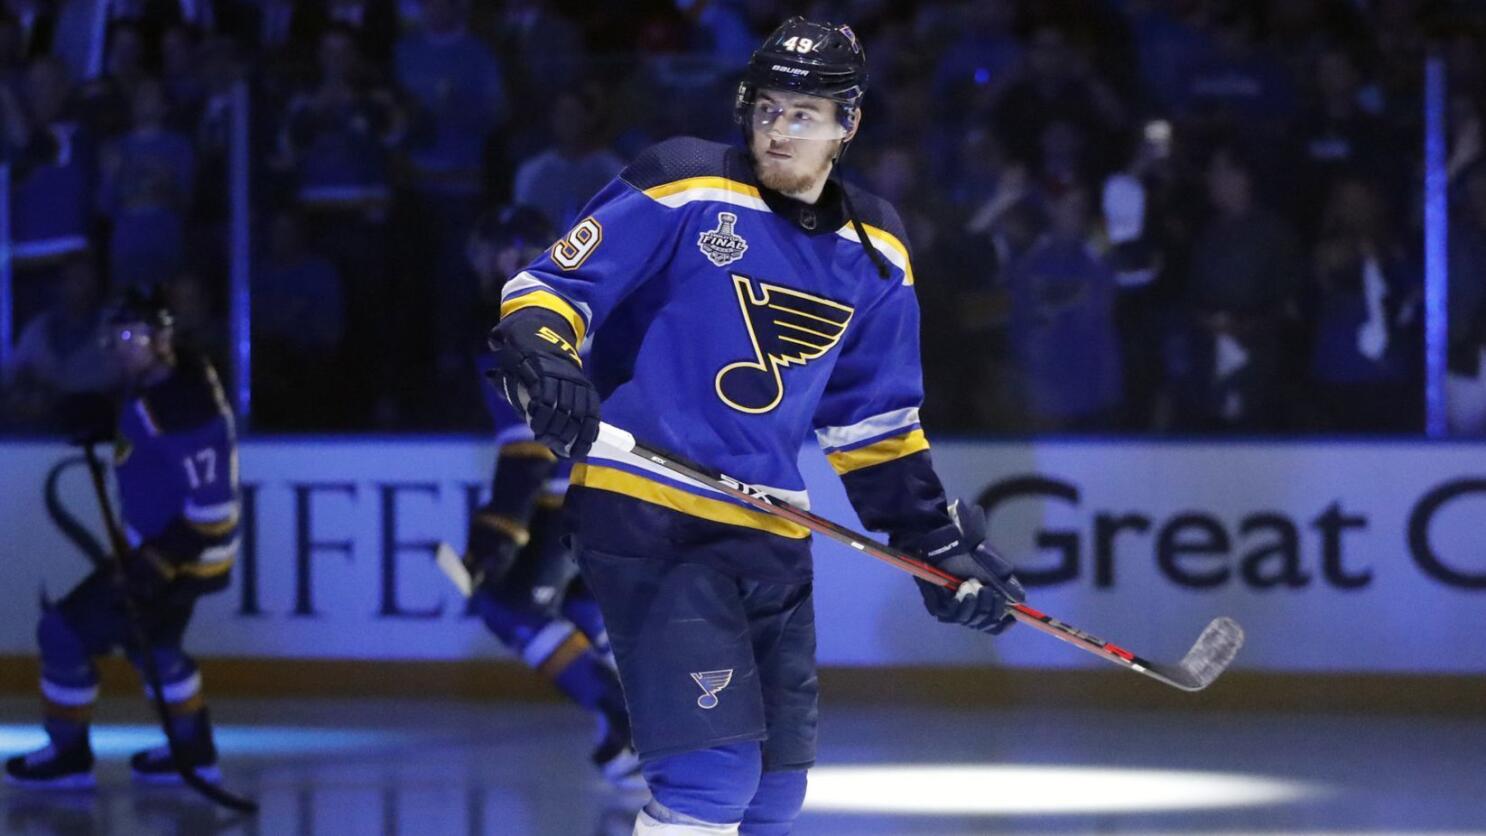 St. Louis Blues: Career Movement Not As Jarring In NHL